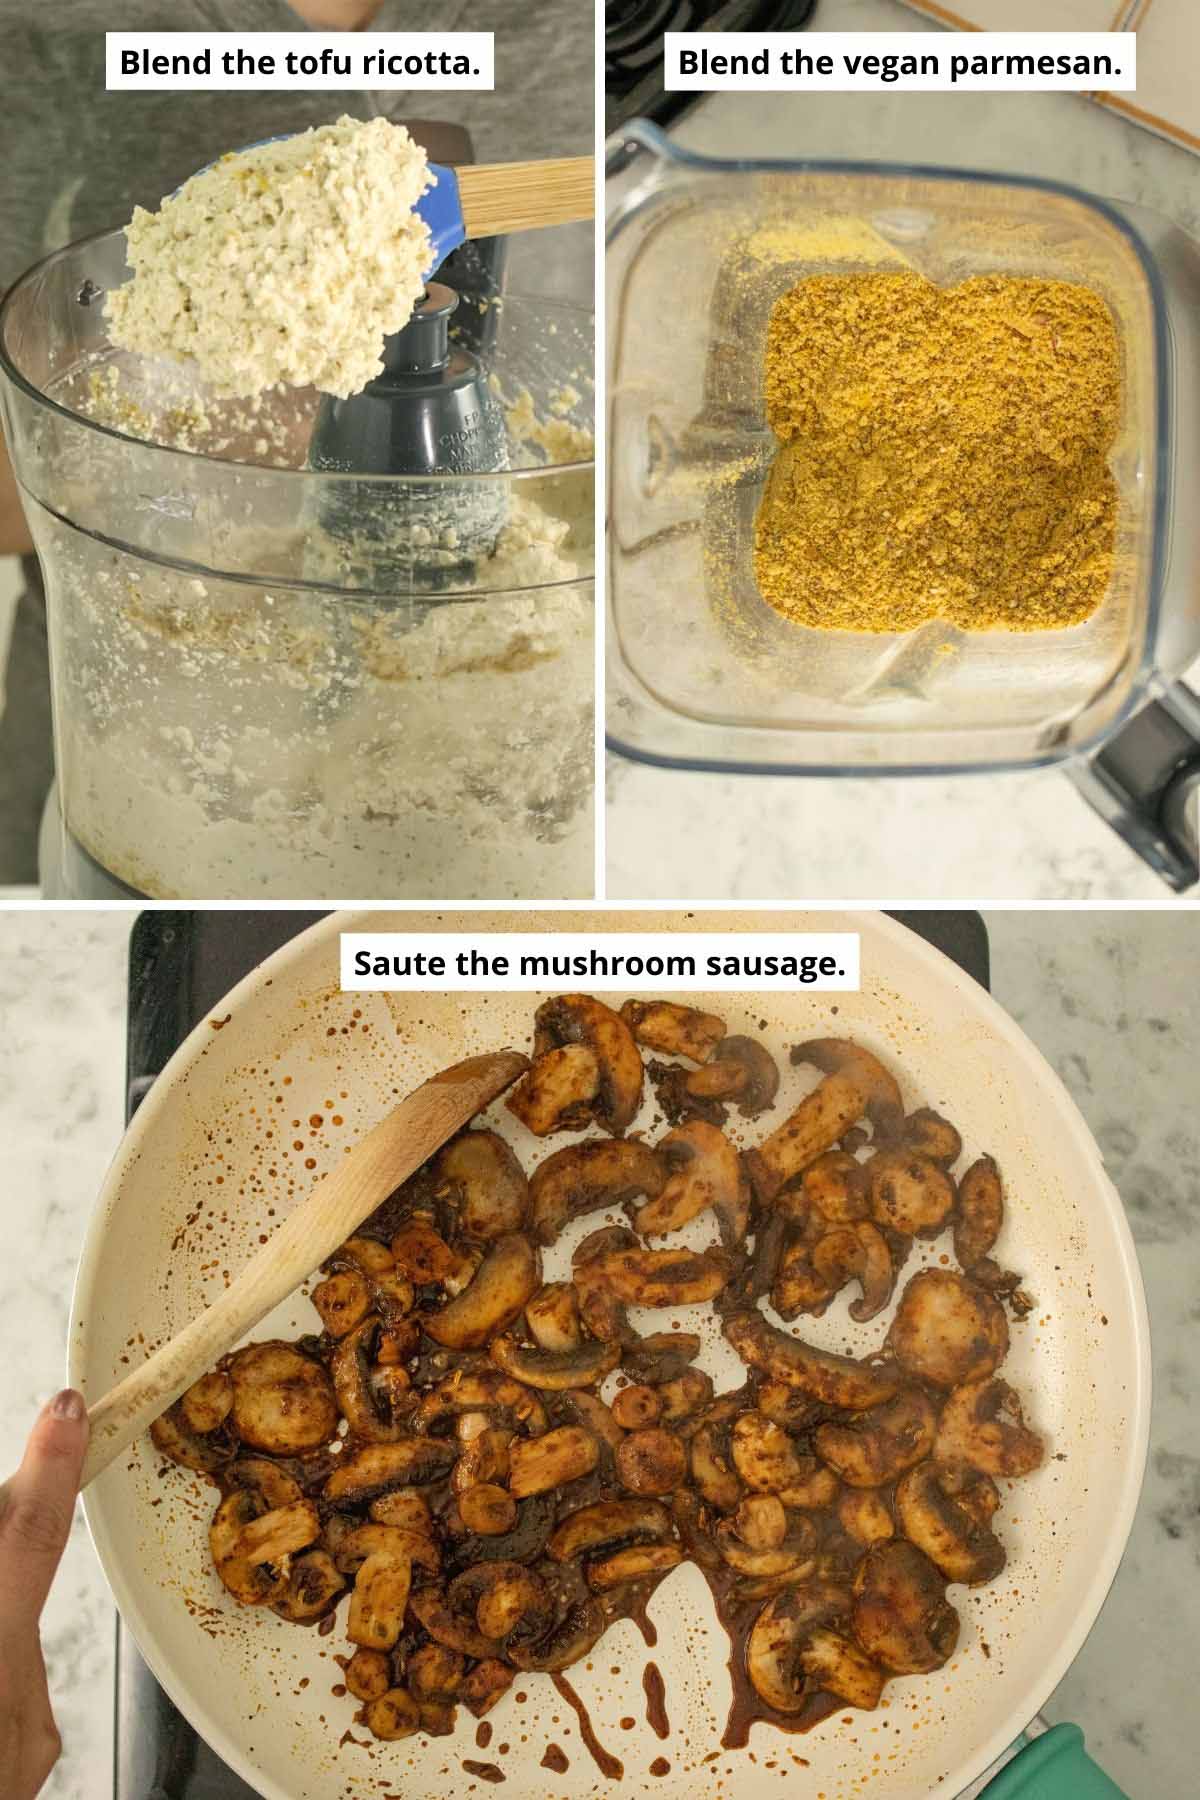 image collage showing what the tofu ricotta, vegan parmesan, and sausage mushrooms look like when they are ready